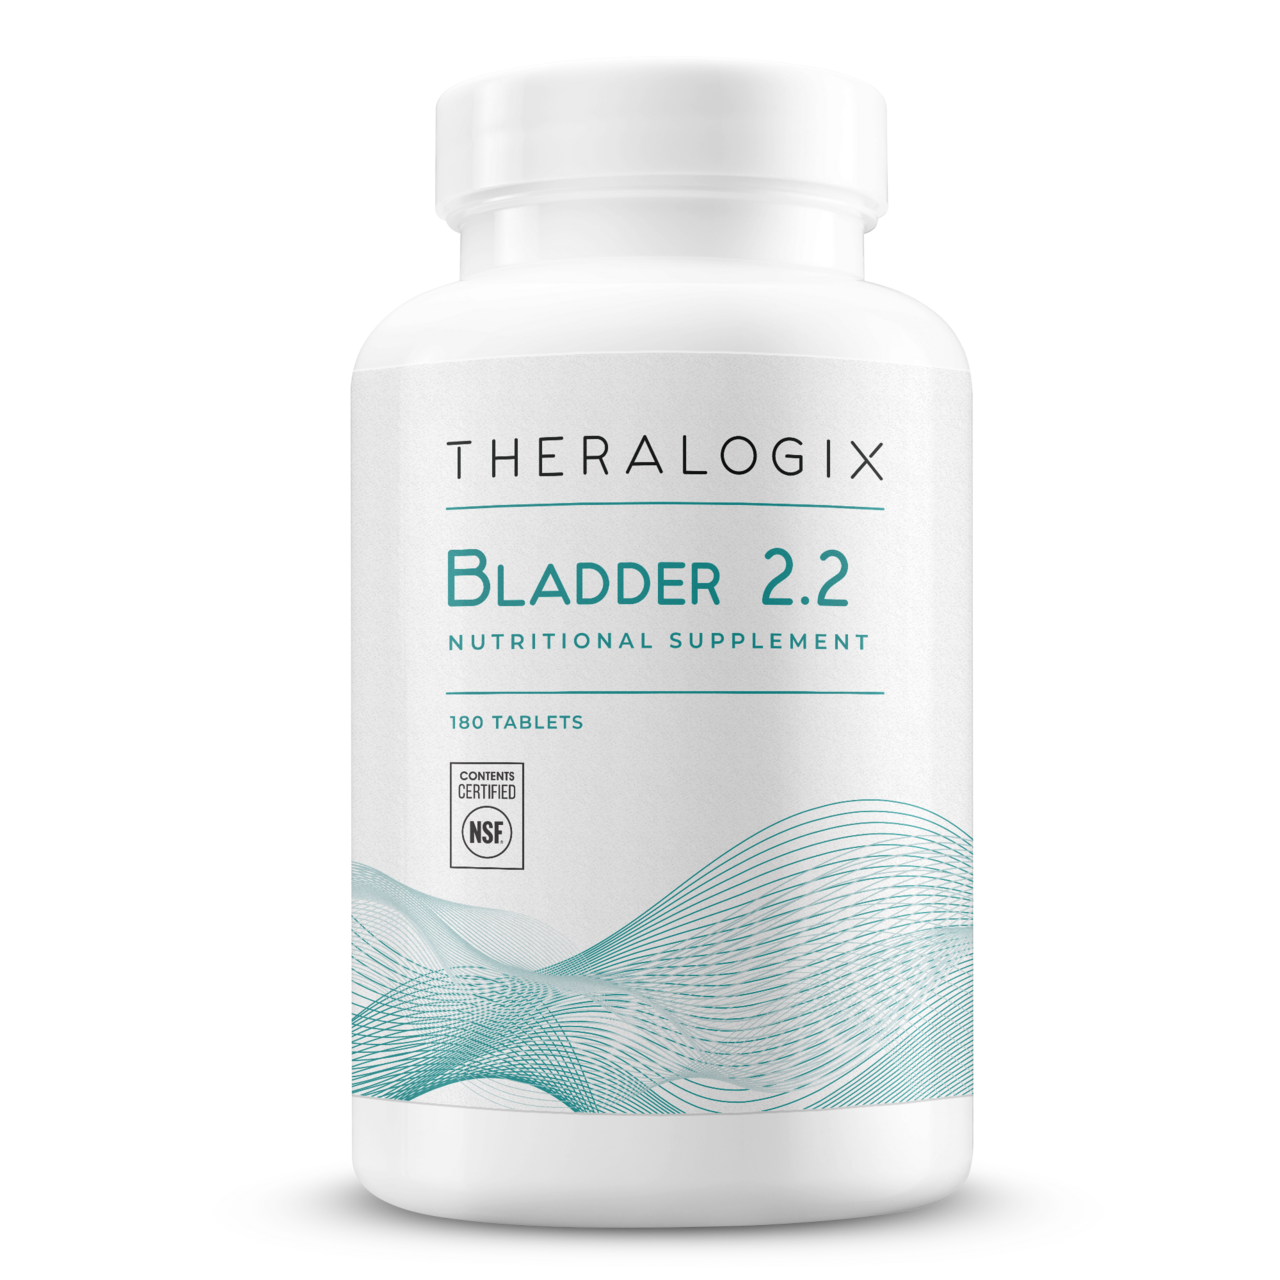 Bladder 2.2 is a unique multivitamin and mineral supplement specifically formulated to promote a healthy bladder lining.